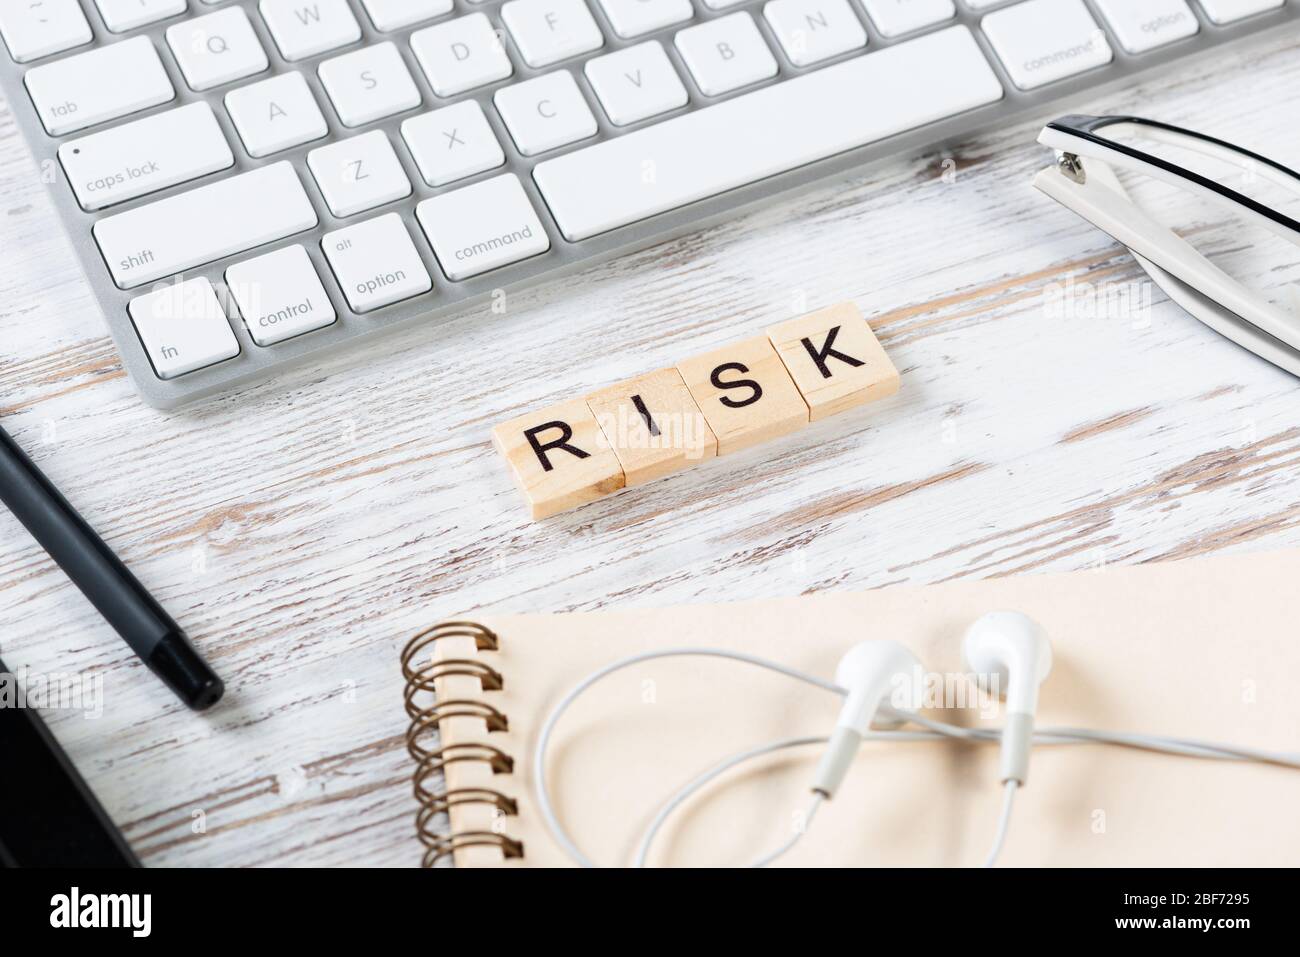 Risk management concept with letters on cubes Stock Photo